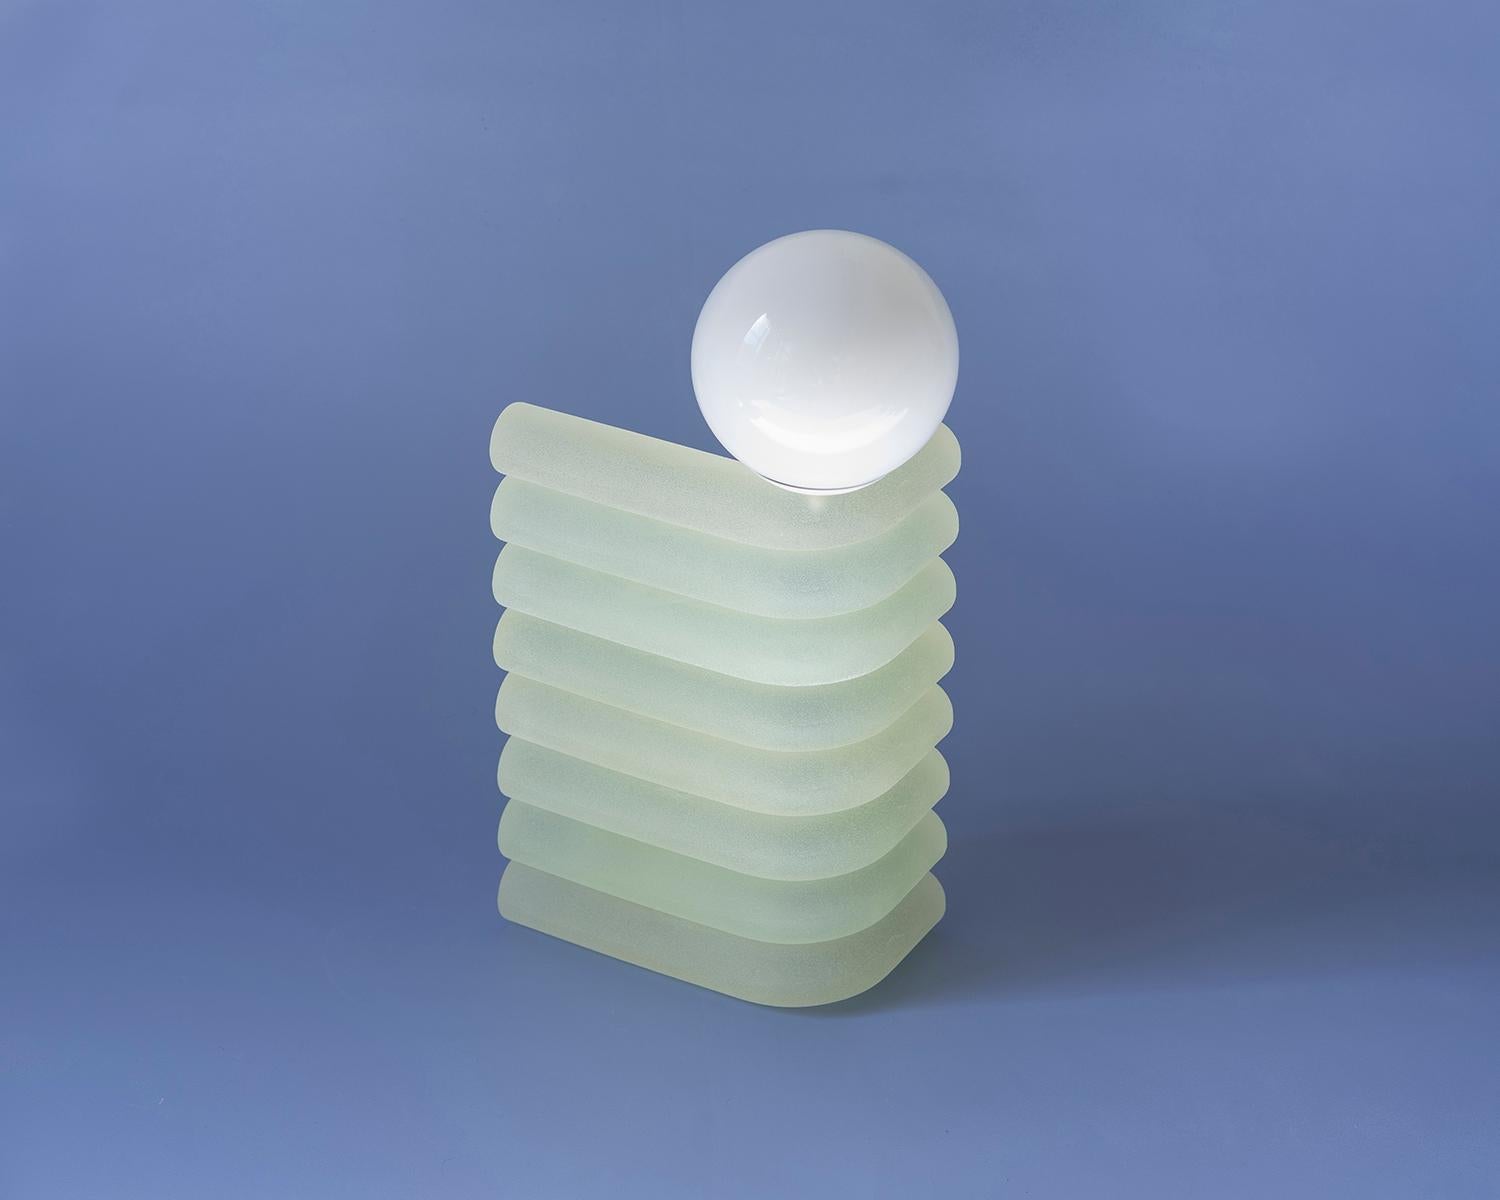 Elio Resin Smart Table Lamp in Aloe by Soft Geometry, Tall In New Condition For Sale In Brooklyn, NY